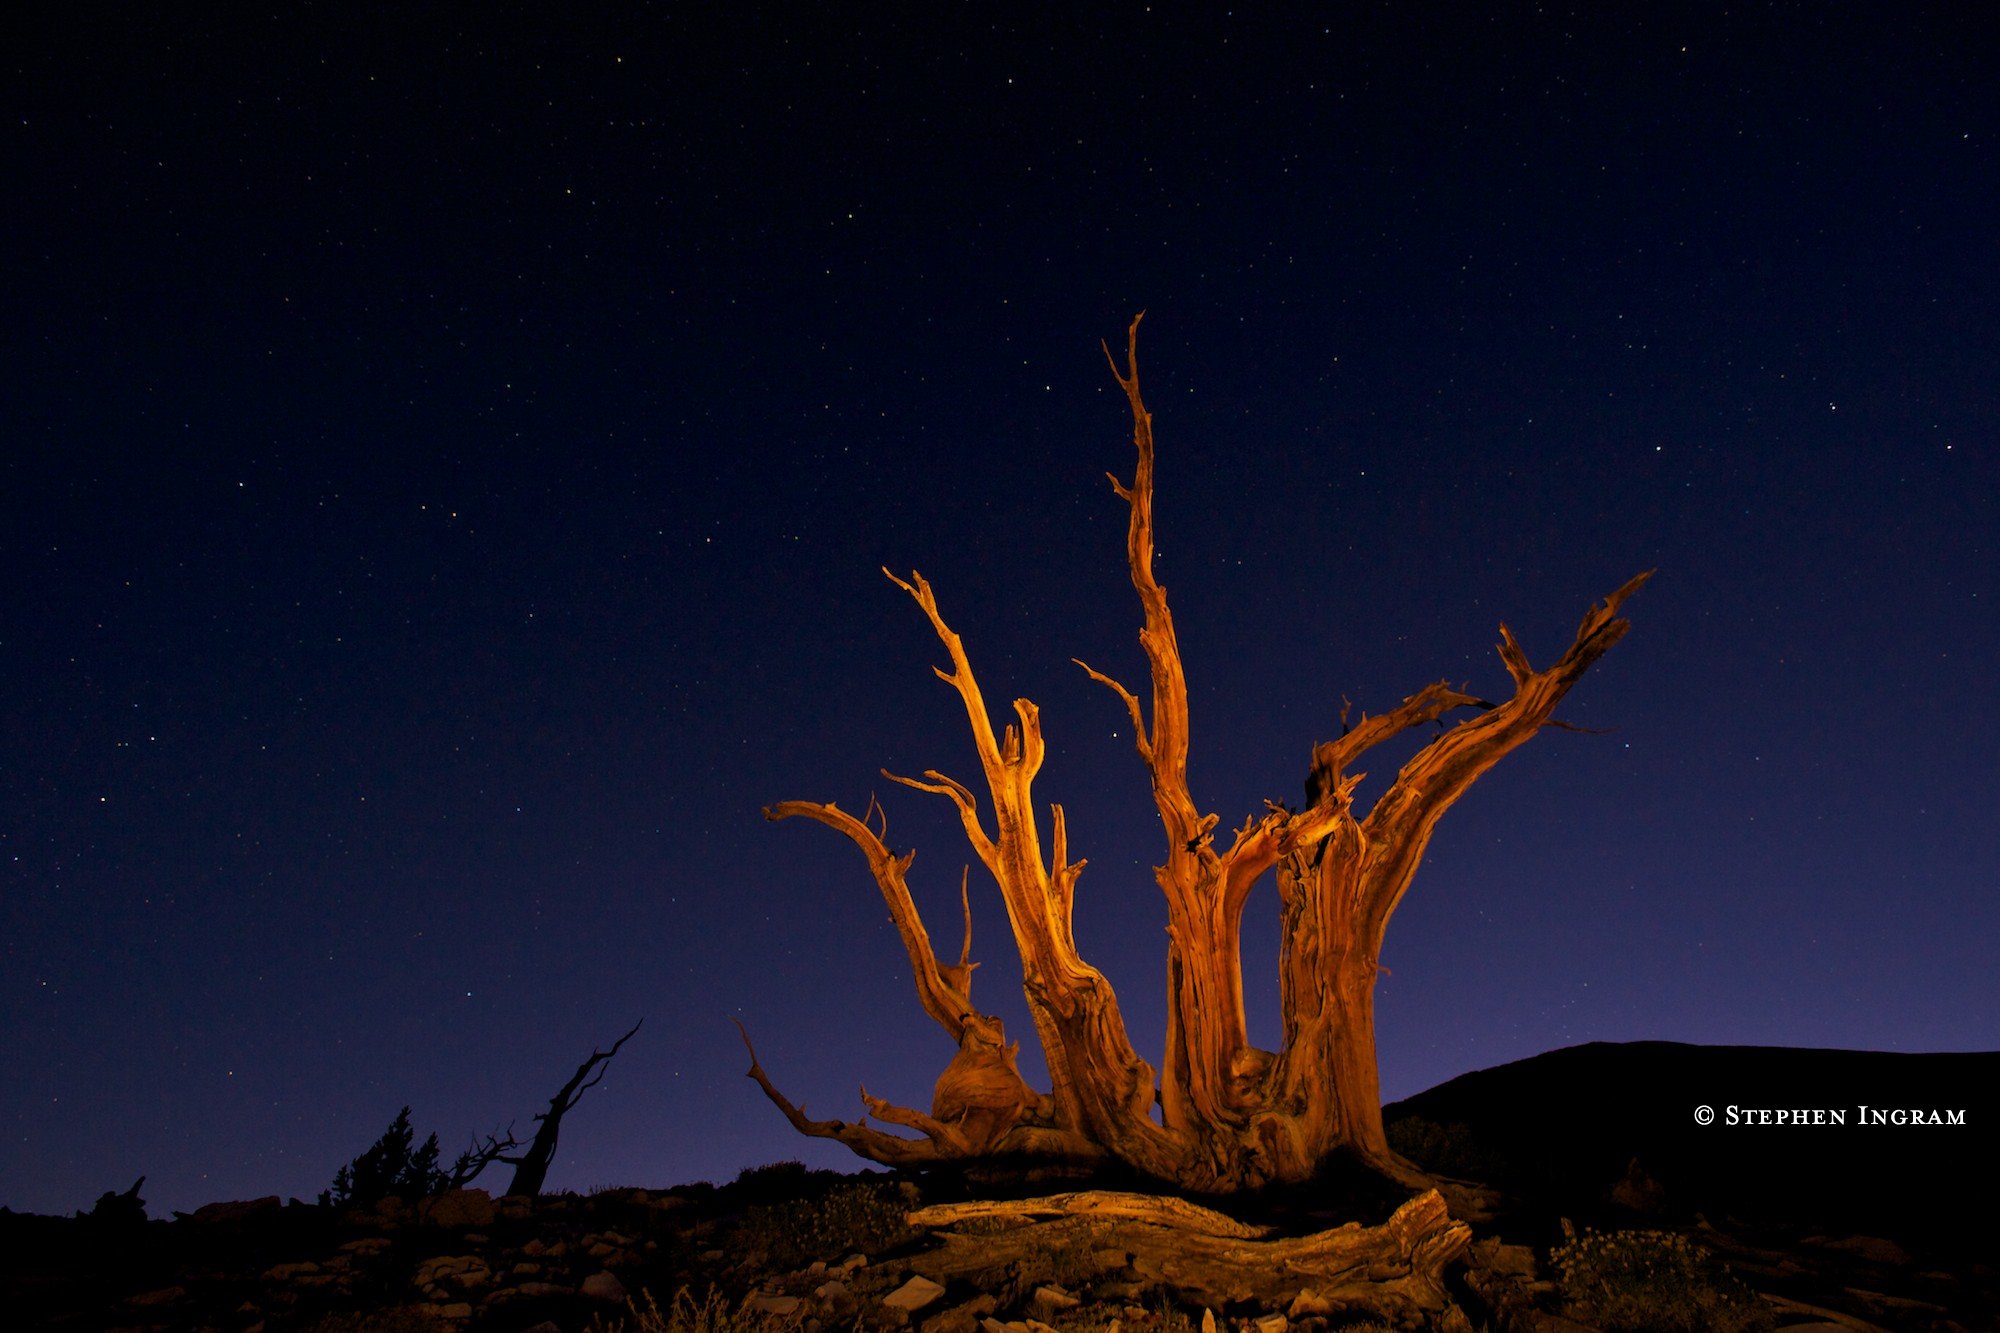 Bristlecone pine snag at night, Ancient Bristlecone Pine Forest, White Mountains, CA